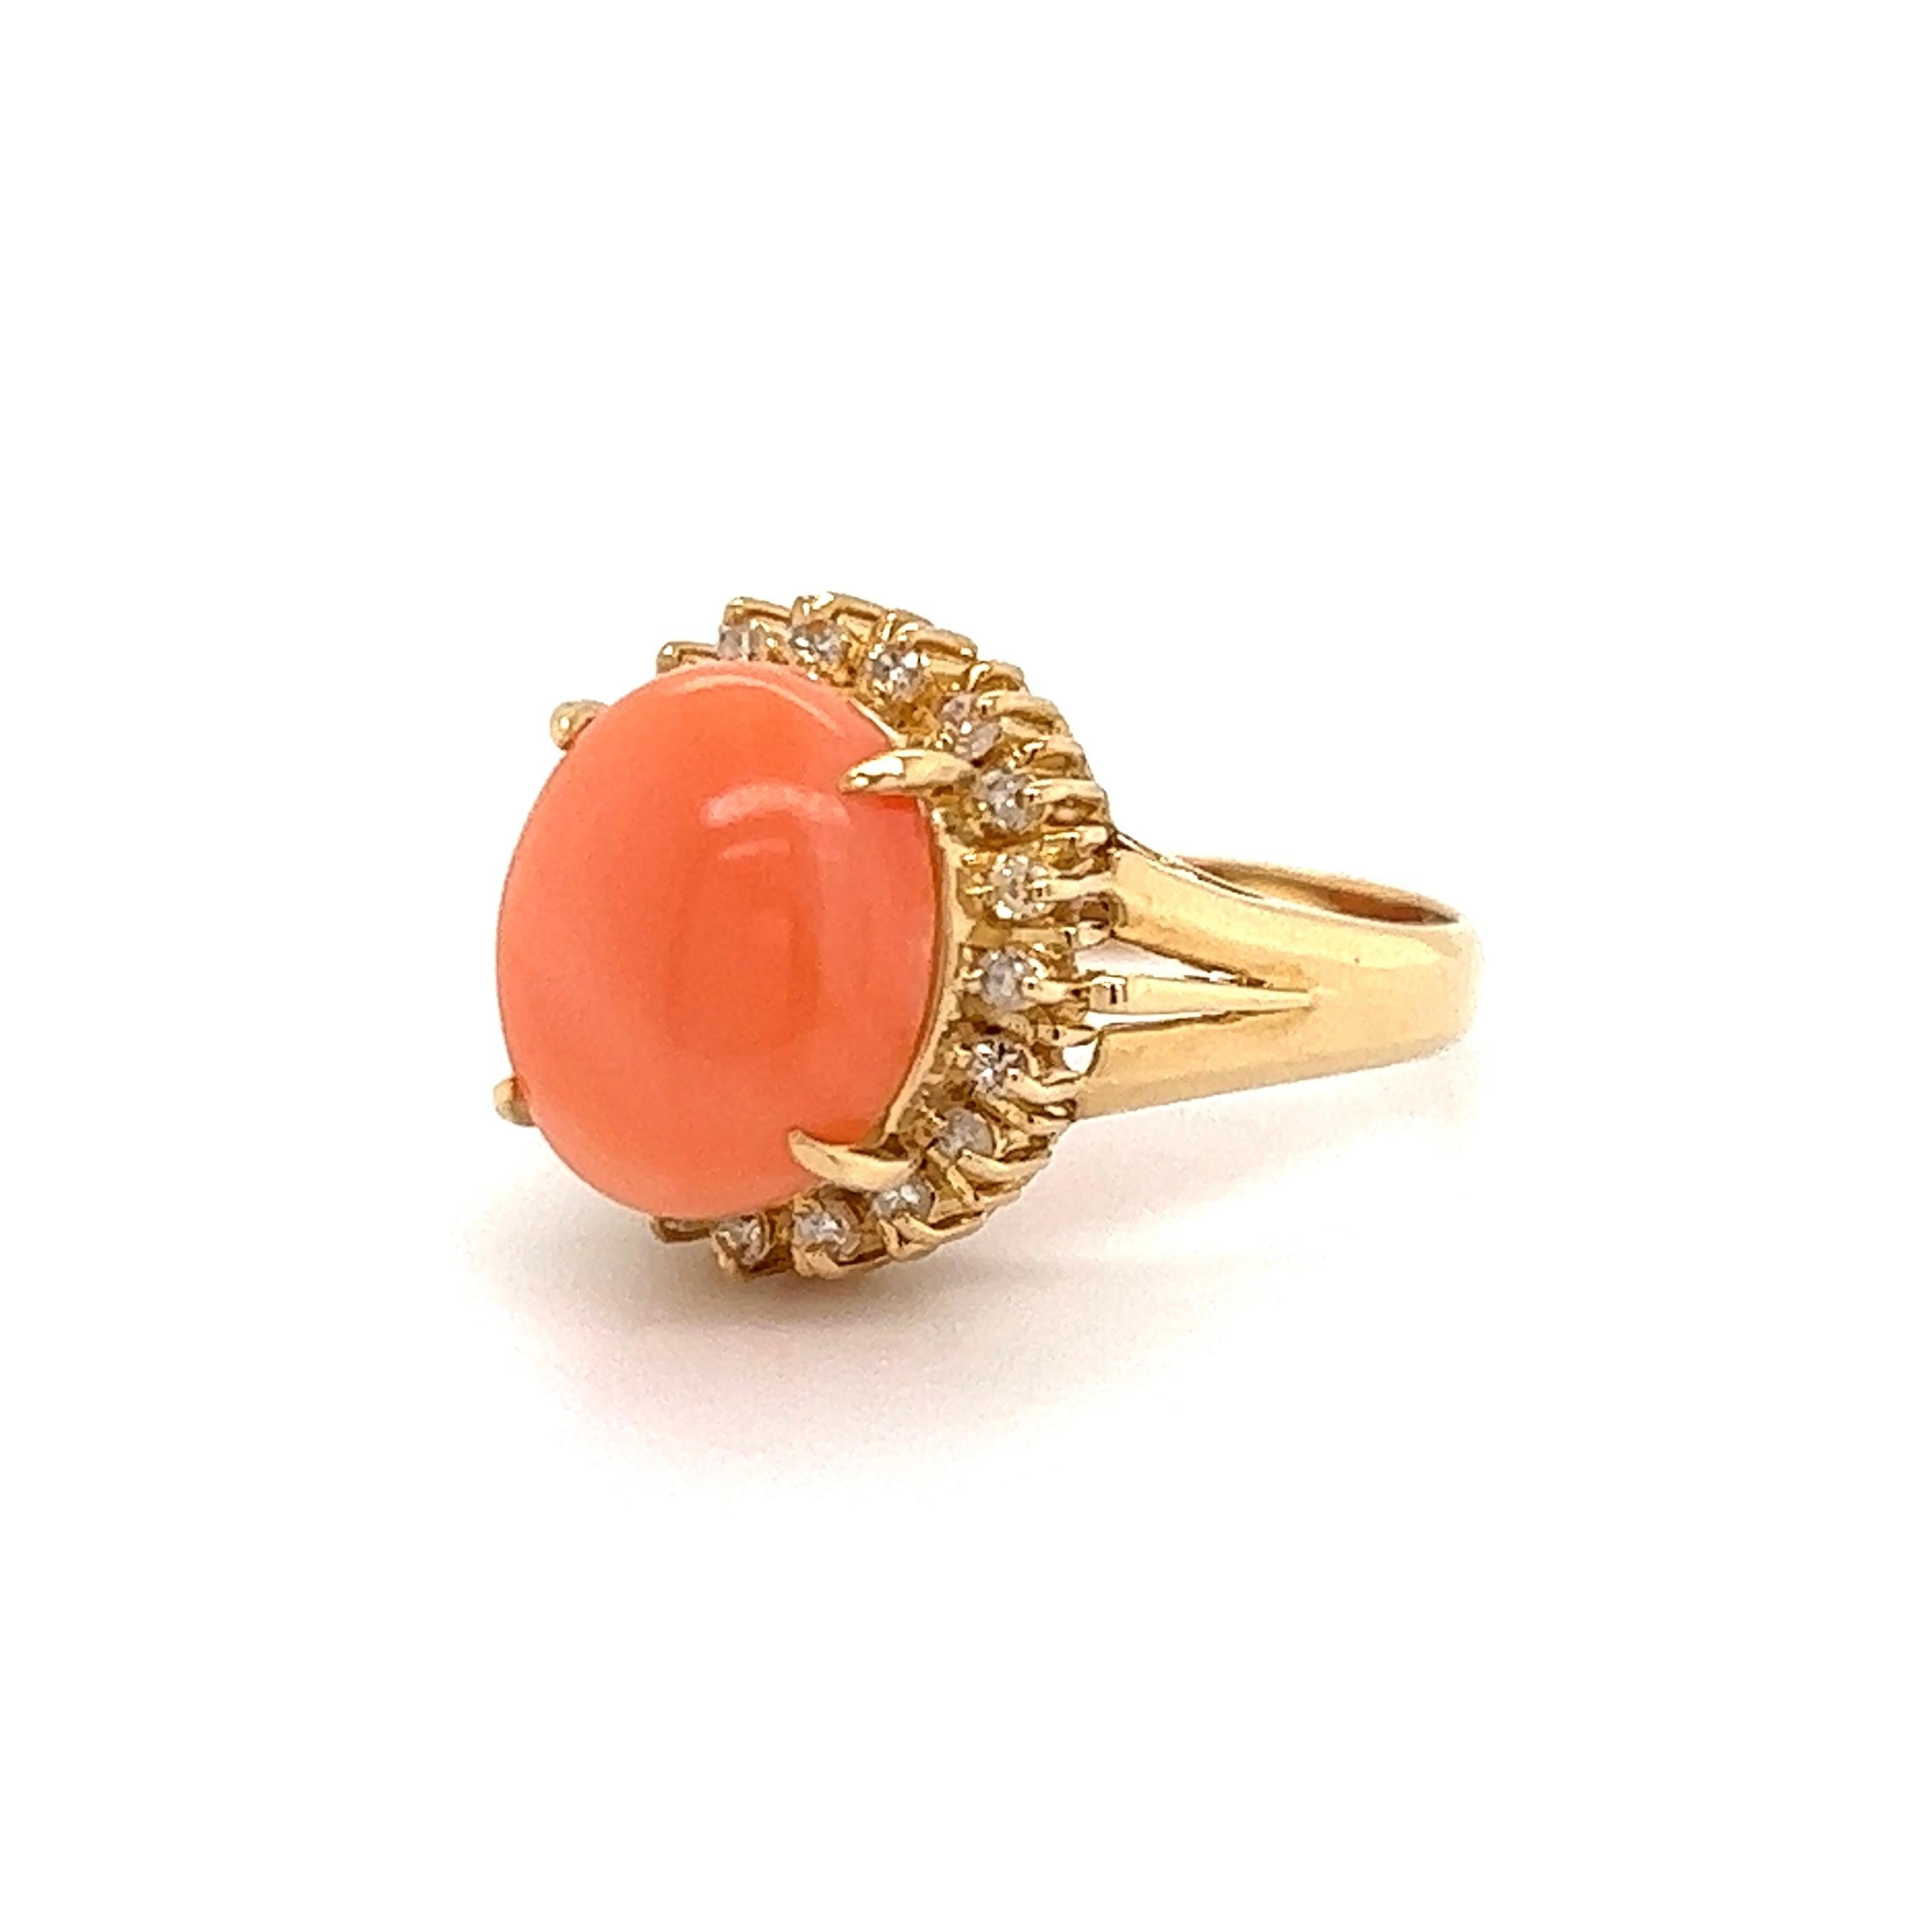 Mixed Cut Angel-Skin Cabochon Coral and Diamond Cocktail Gold Ring